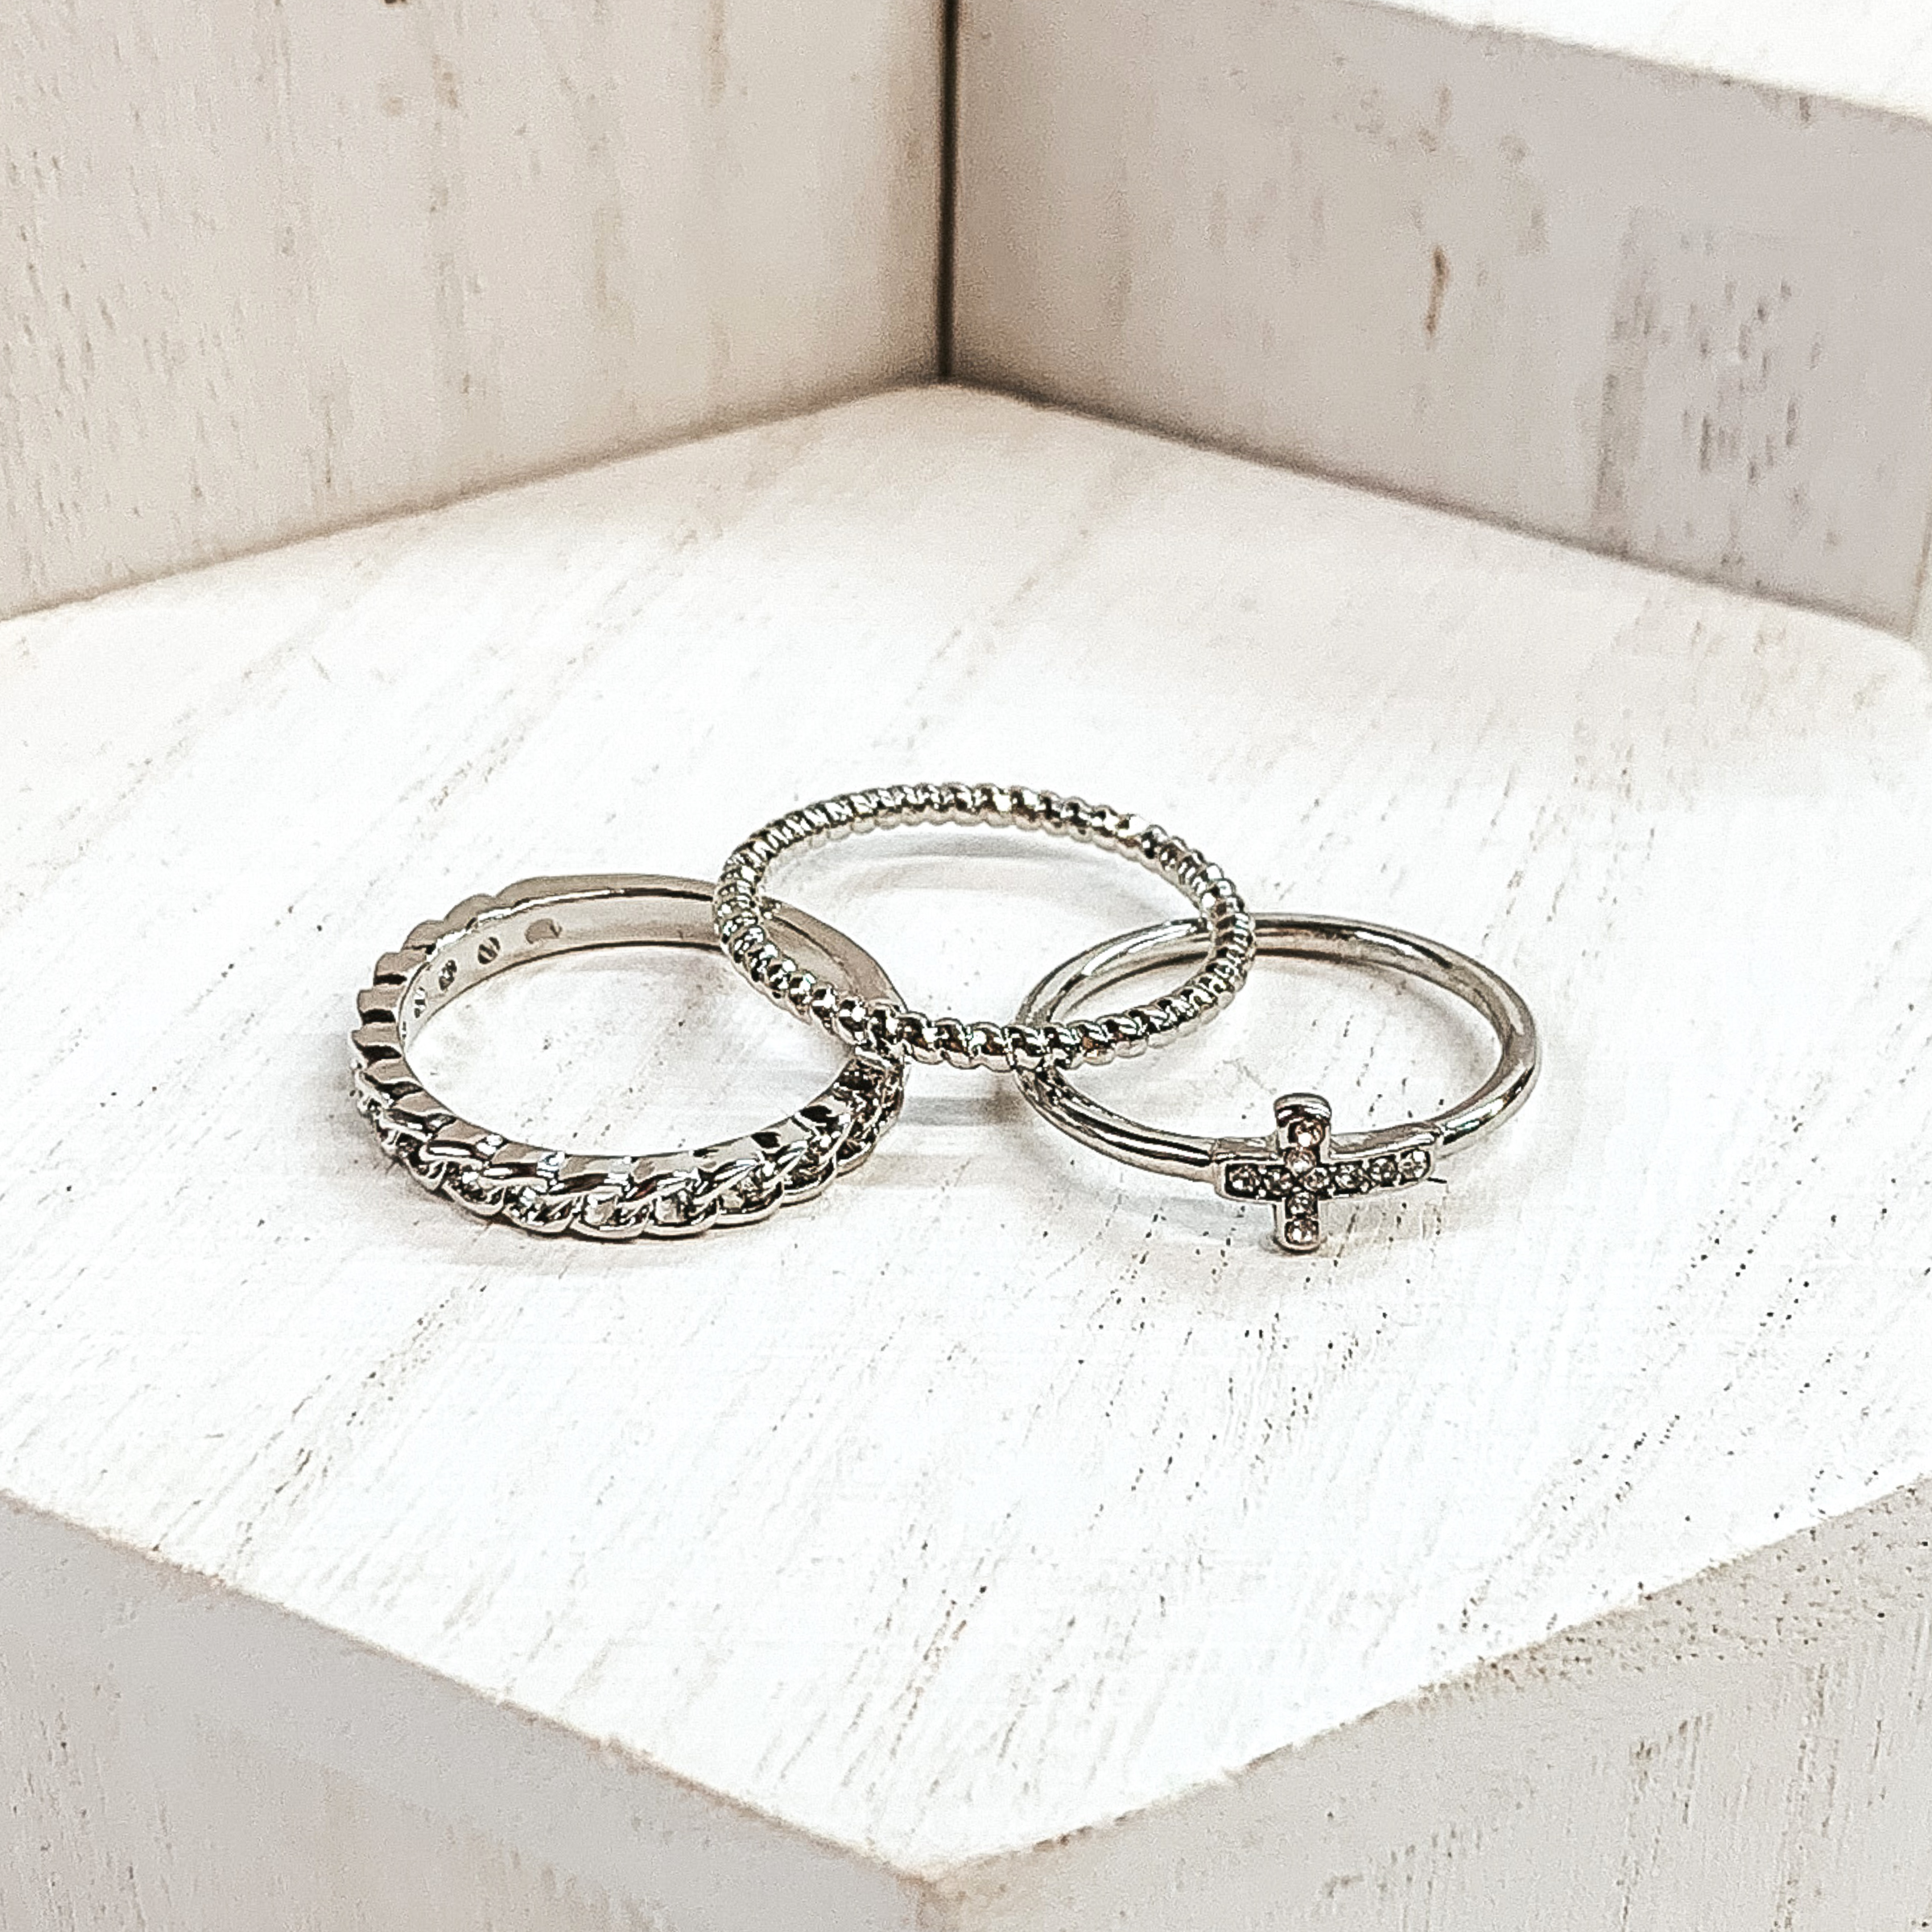 Set of three silver rings. One ring is a twisted ring, another is a half chained ring, and the last ring has a cross pendant that has clear crystals. These rings are pictured on white blocks. 